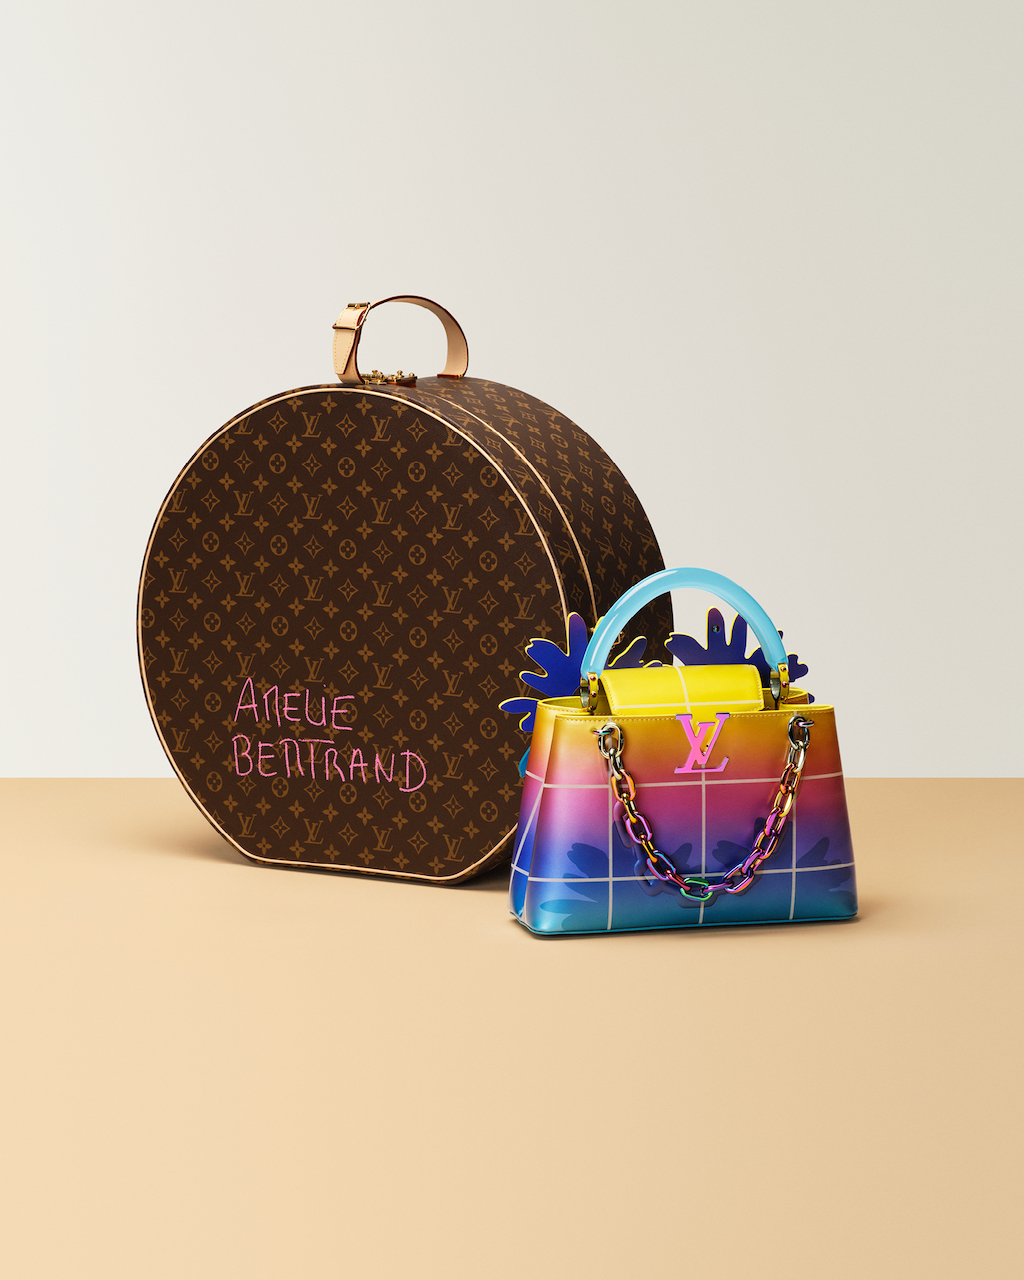 Products By Louis Vuitton: Artycapucines Pm Josh Smith